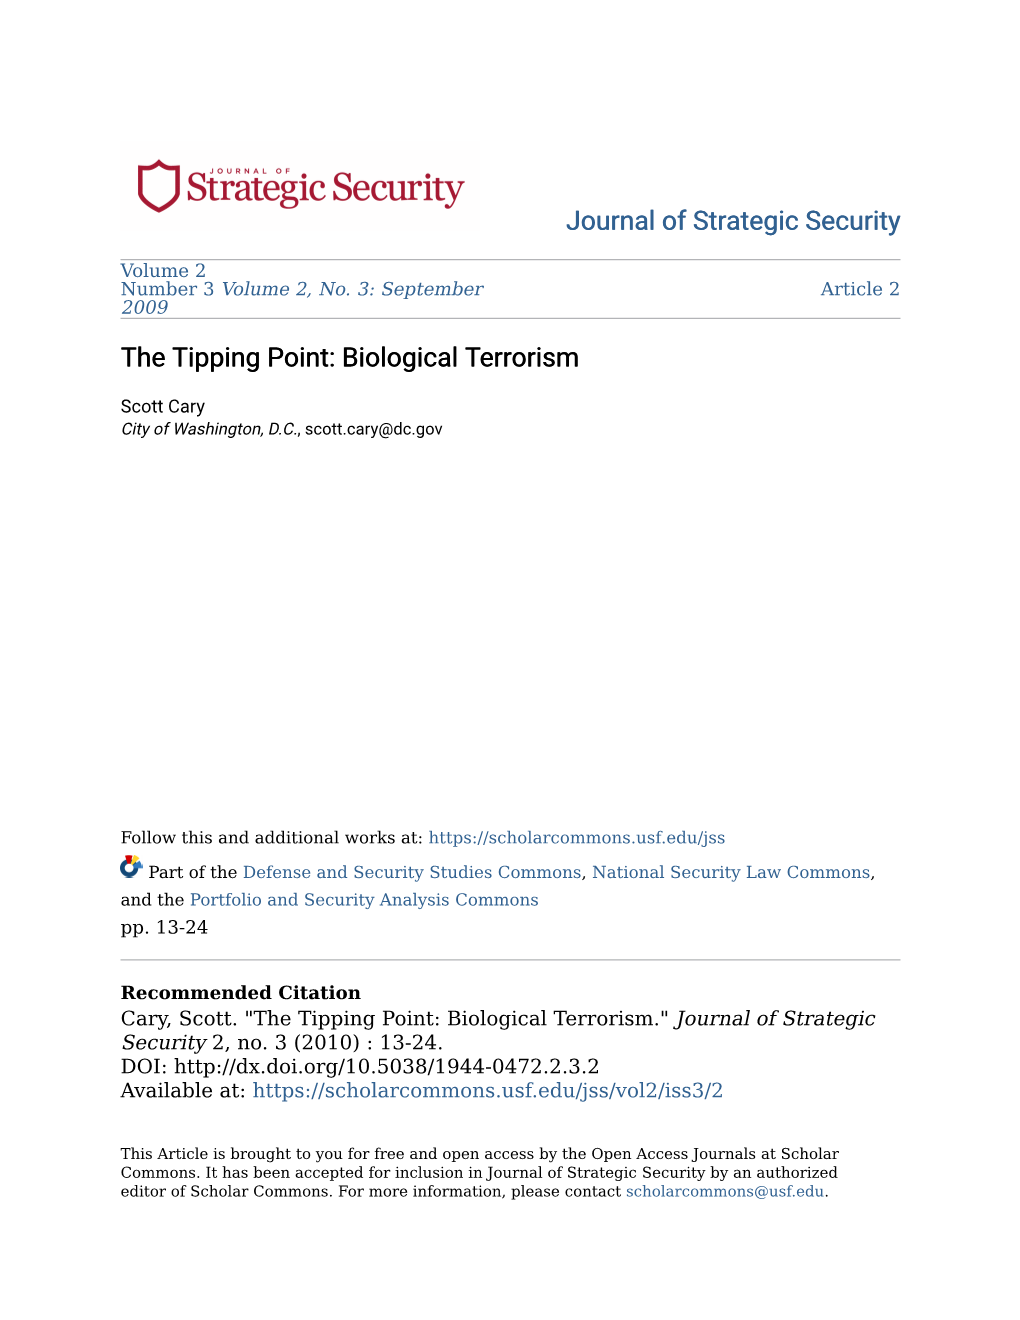 The Tipping Point: Biological Terrorism